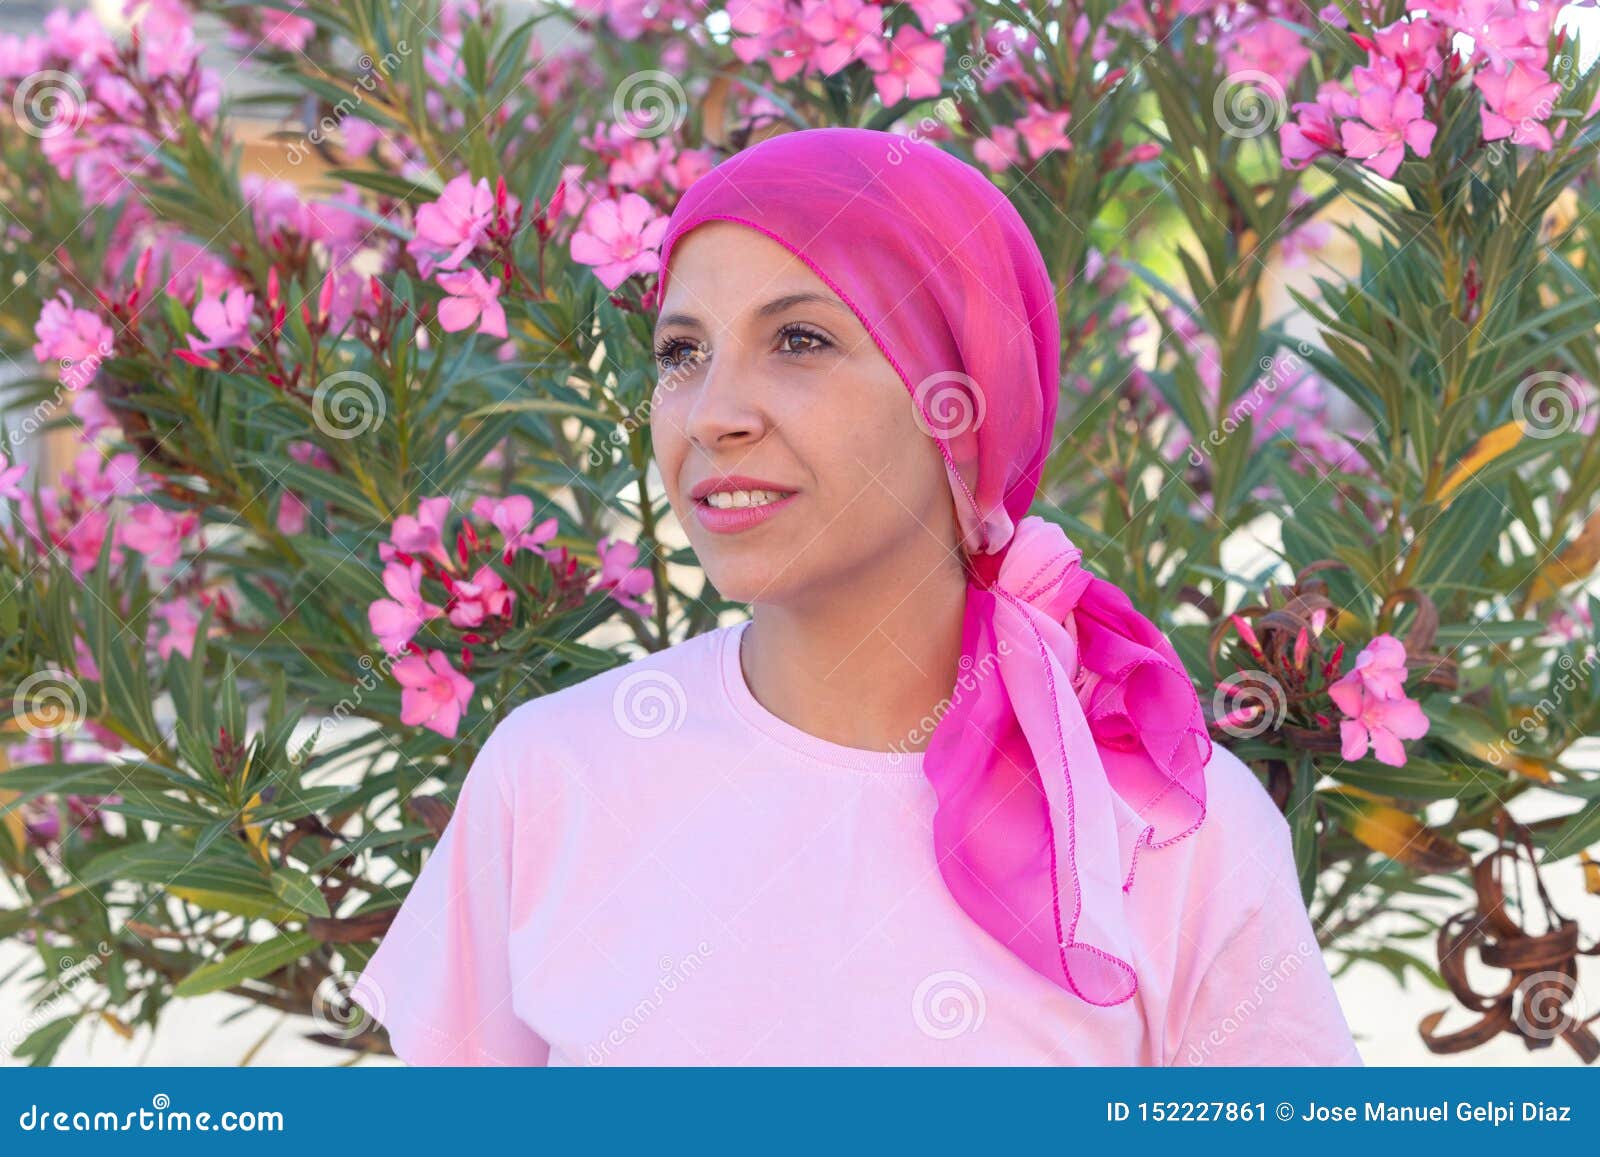 Woman with Pink Scarf on the Head Stock Image - Image of oncology ...